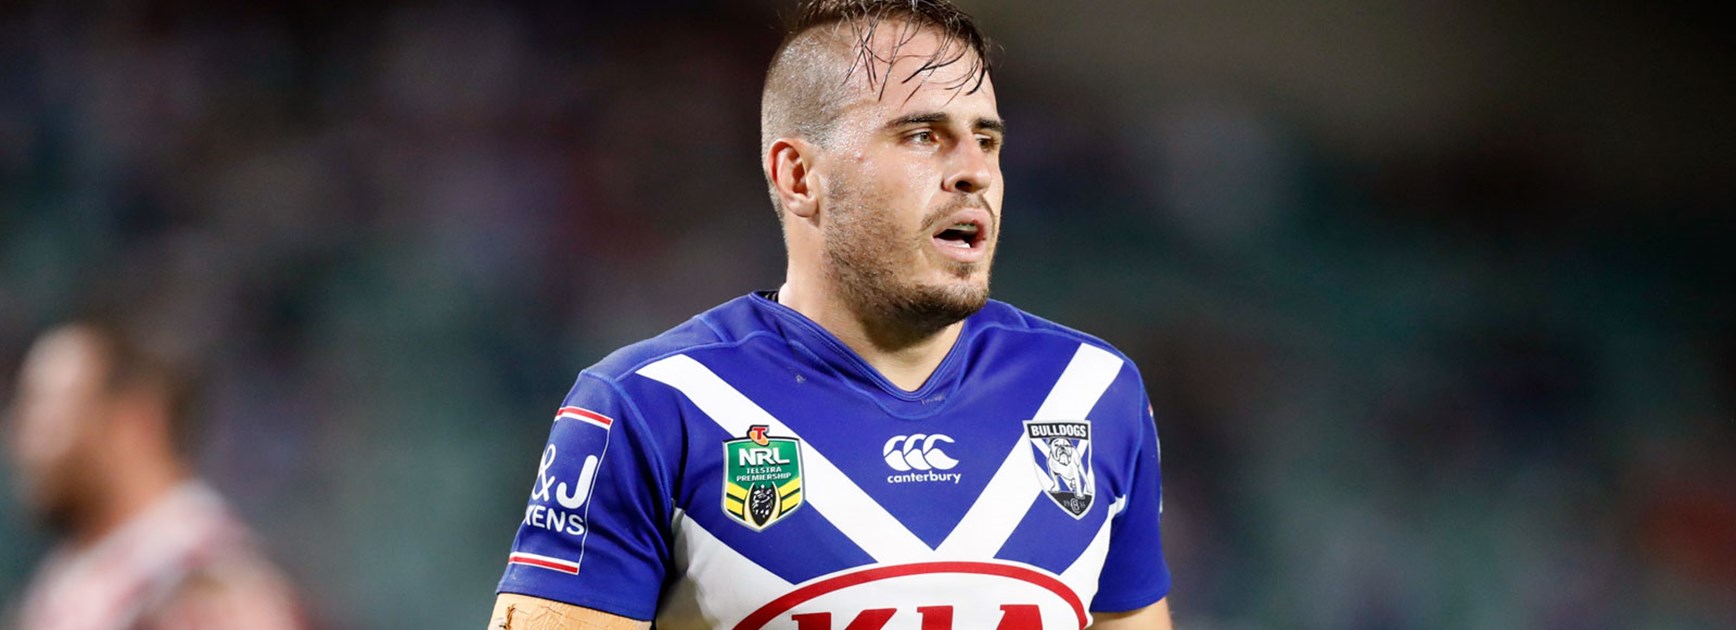 Bulldogs' Reynolds out of Dragons clash